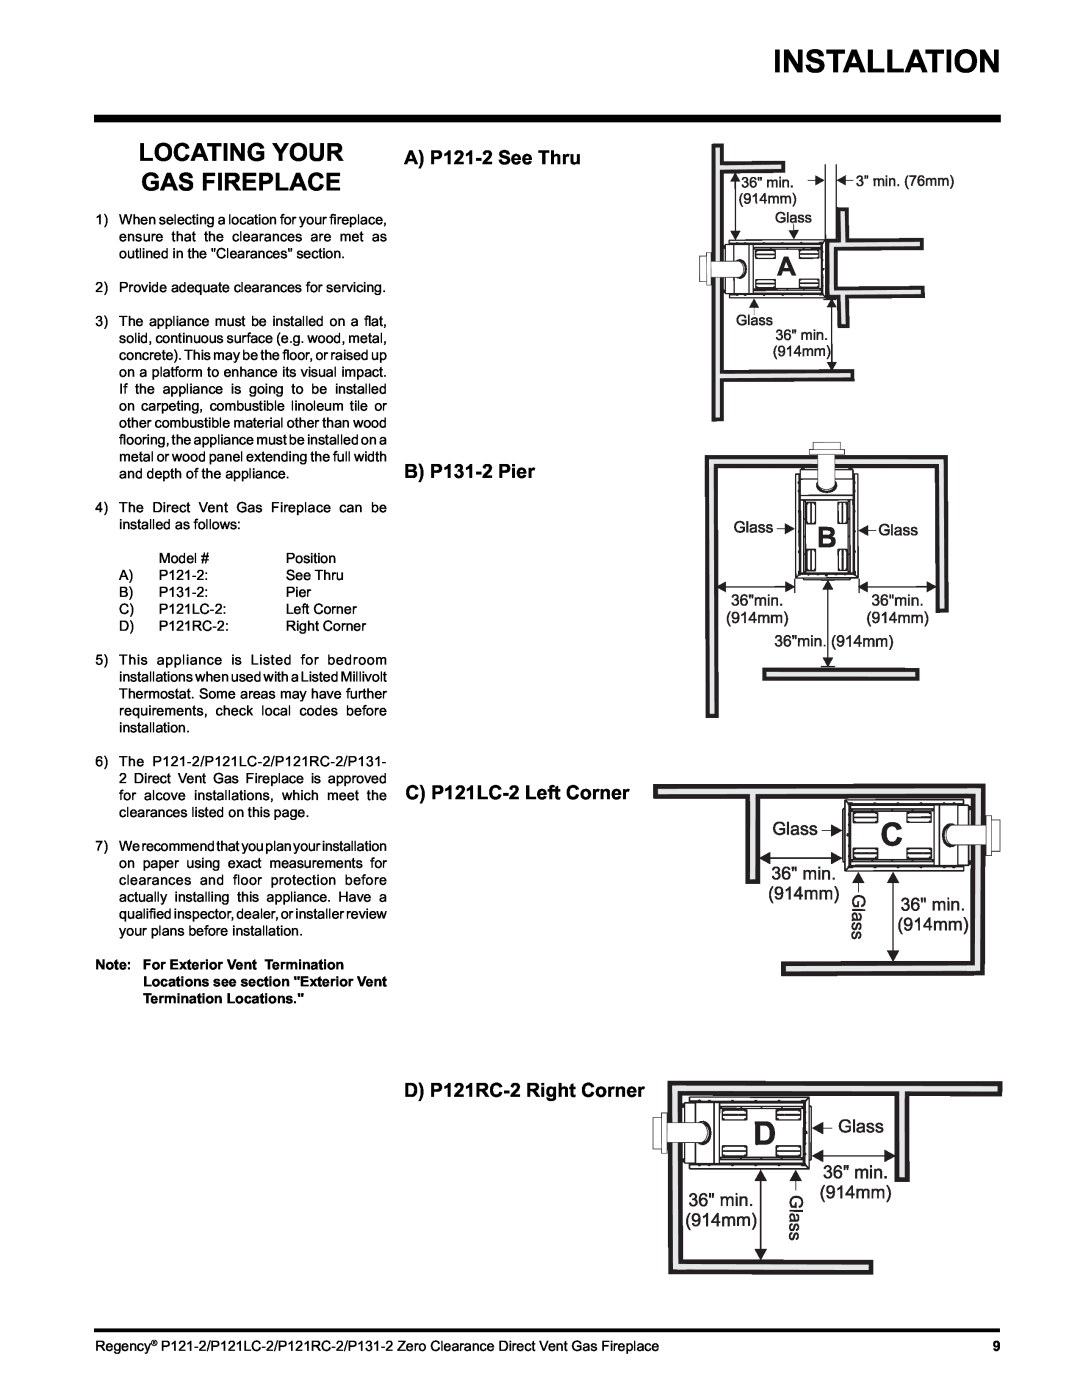 Regency P121LC installation manual Locating Your Gas Fireplace, A P121-2See Thru B P131-2Pier, D P121RC-2Right Corner 